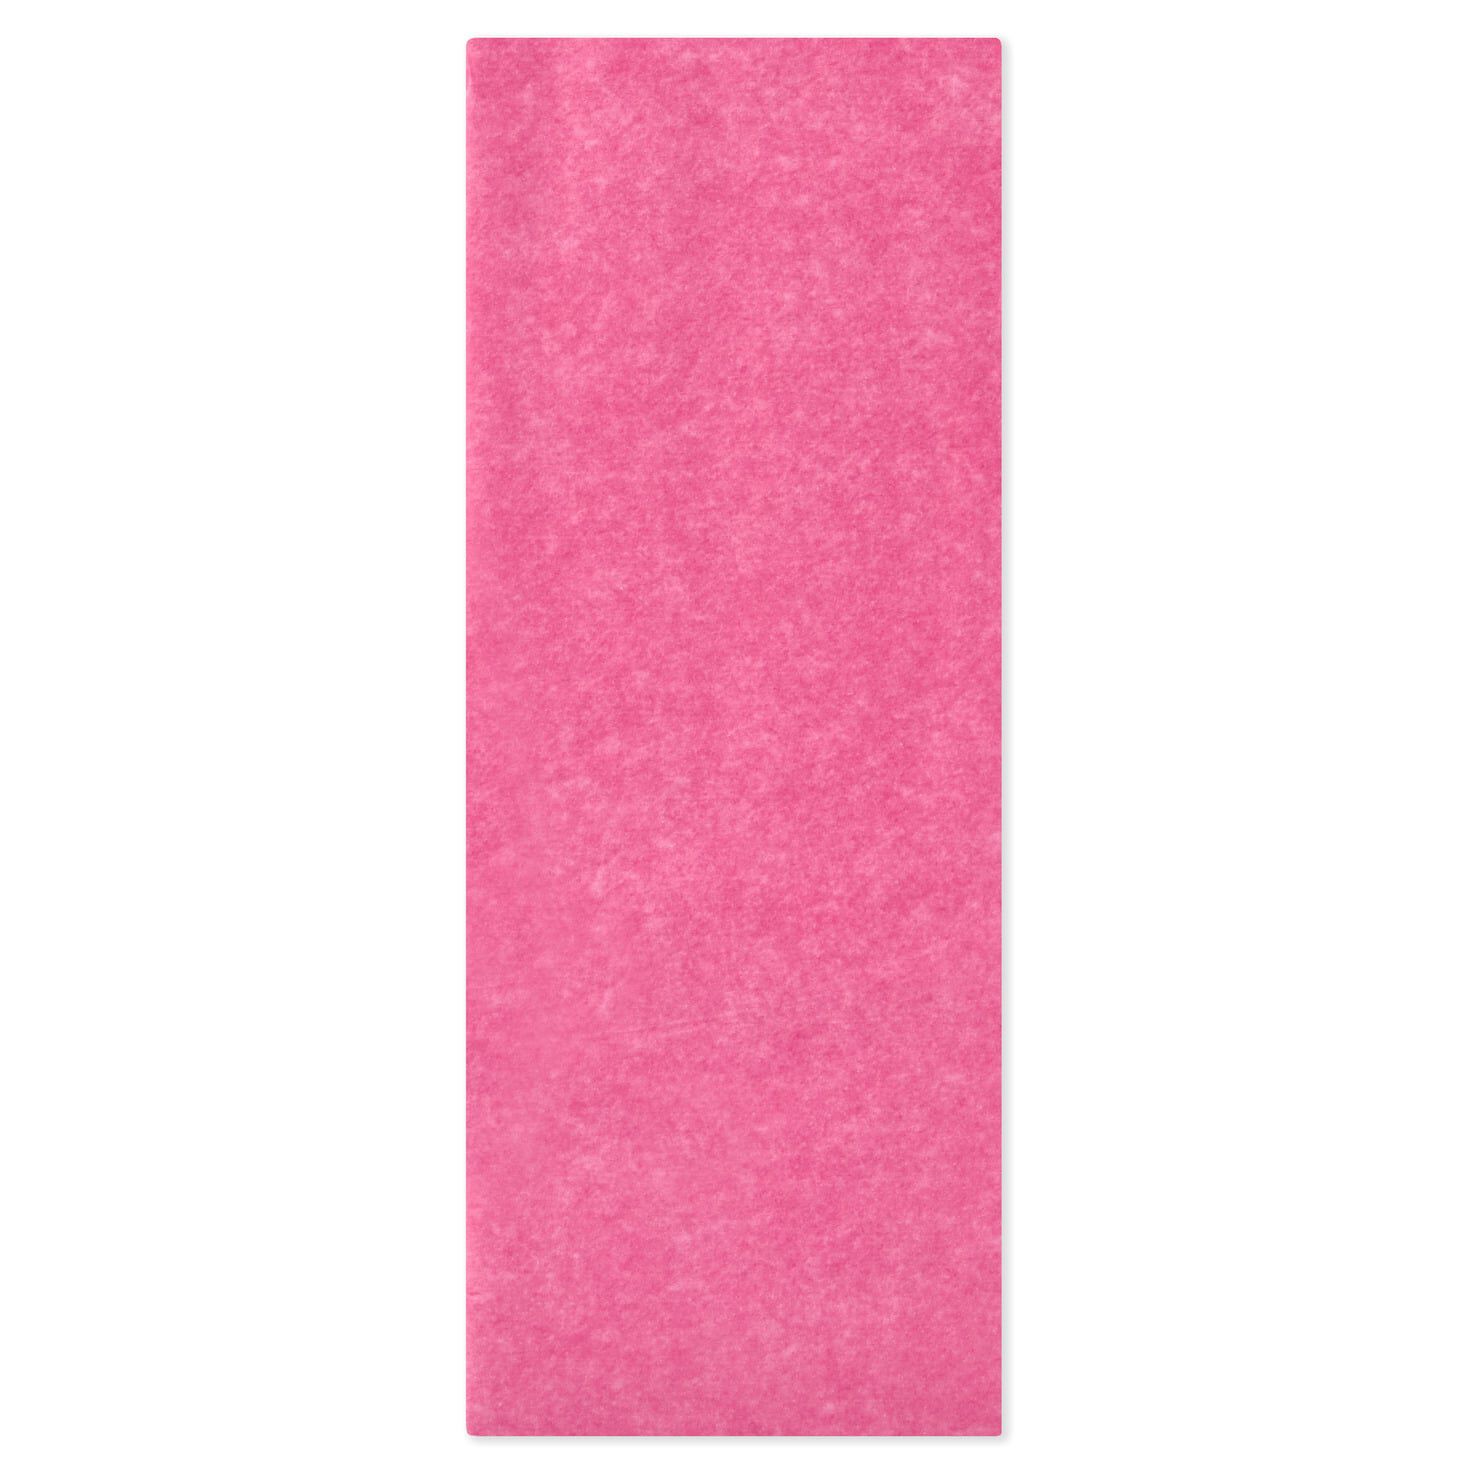 Cerise Pink Tissue Paper, 8 sheets for only USD 1.99 | Hallmark